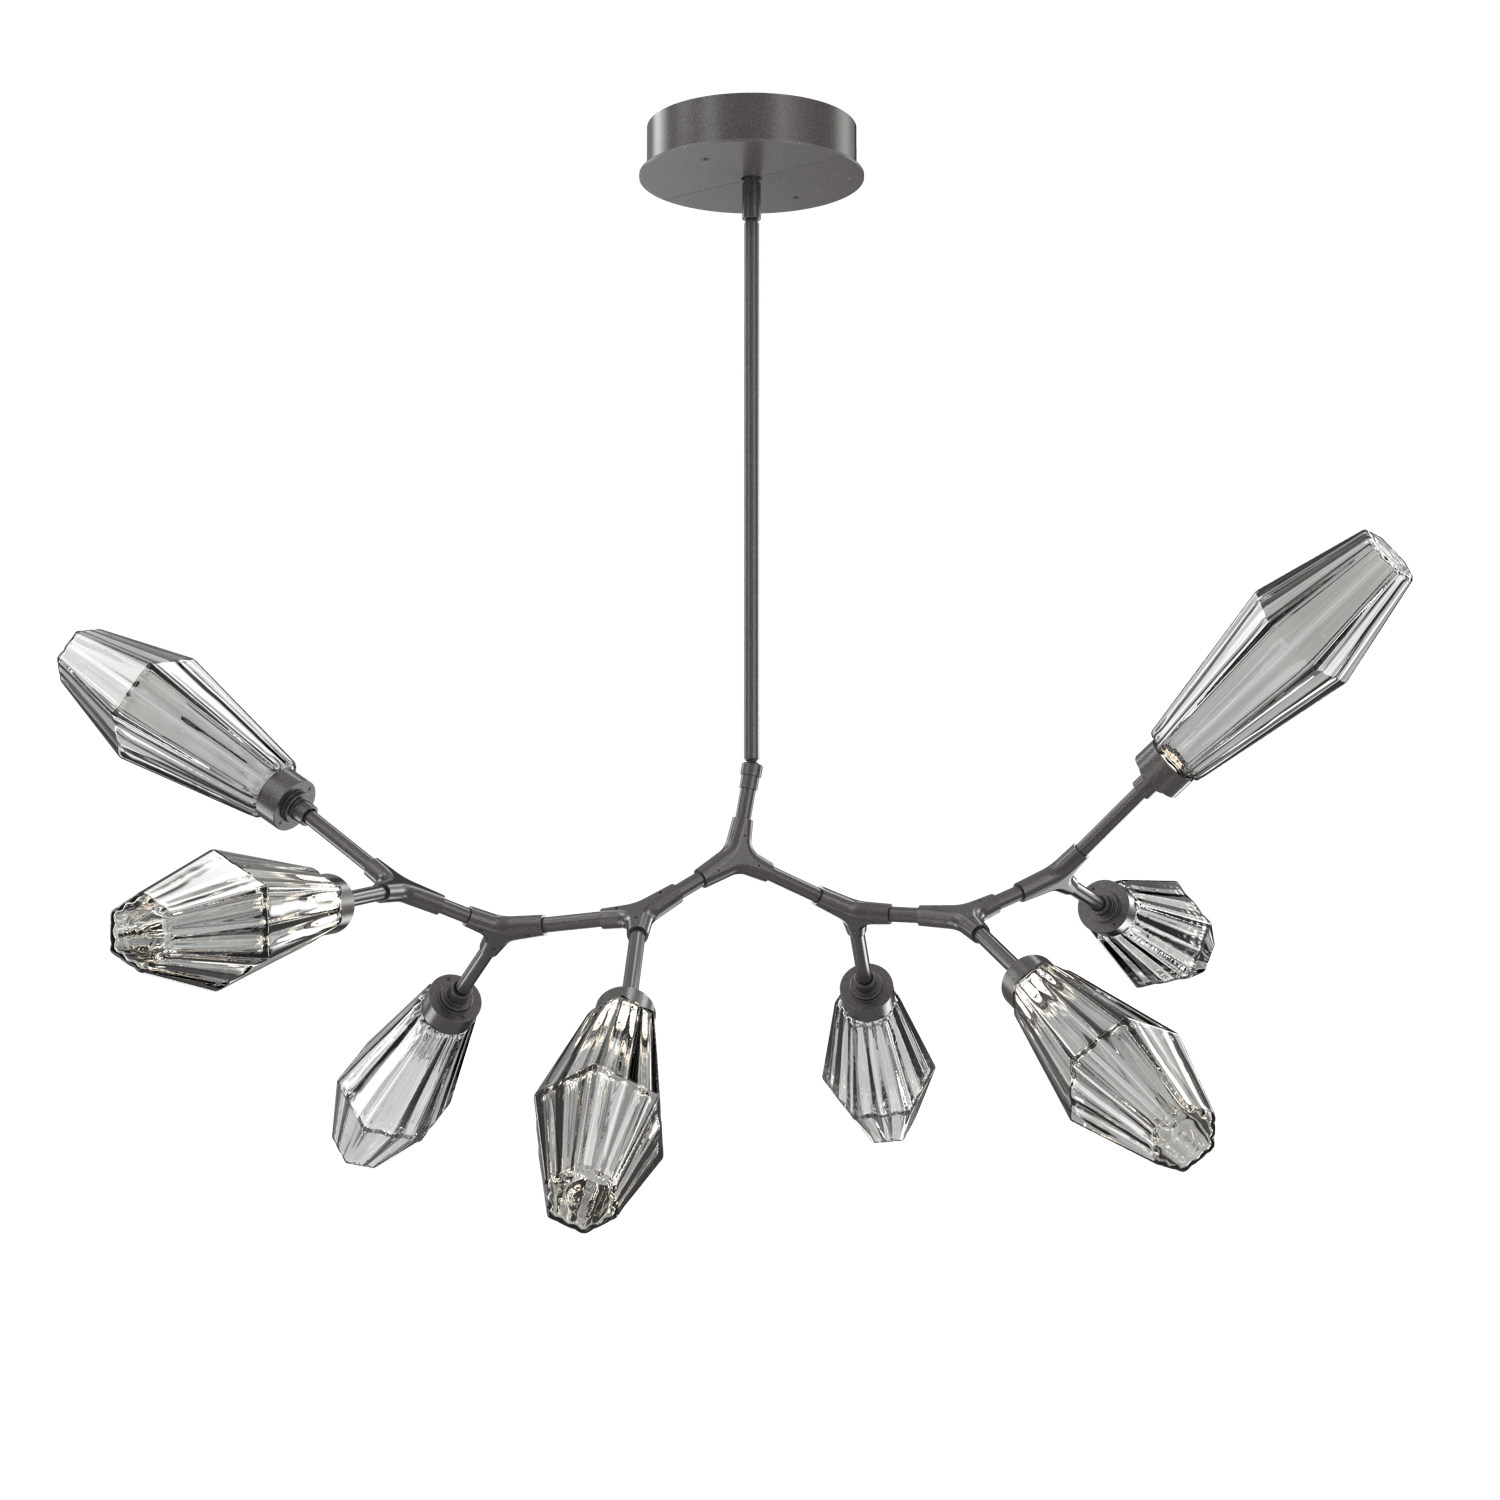 PLB0049-BB-GP-RS-Hammerton-Studio-Aalto-8-light-modern-branch-chandelier-with-graphite-finish-and-optic-ribbed-smoke-glass-shades-and-LED-lamping